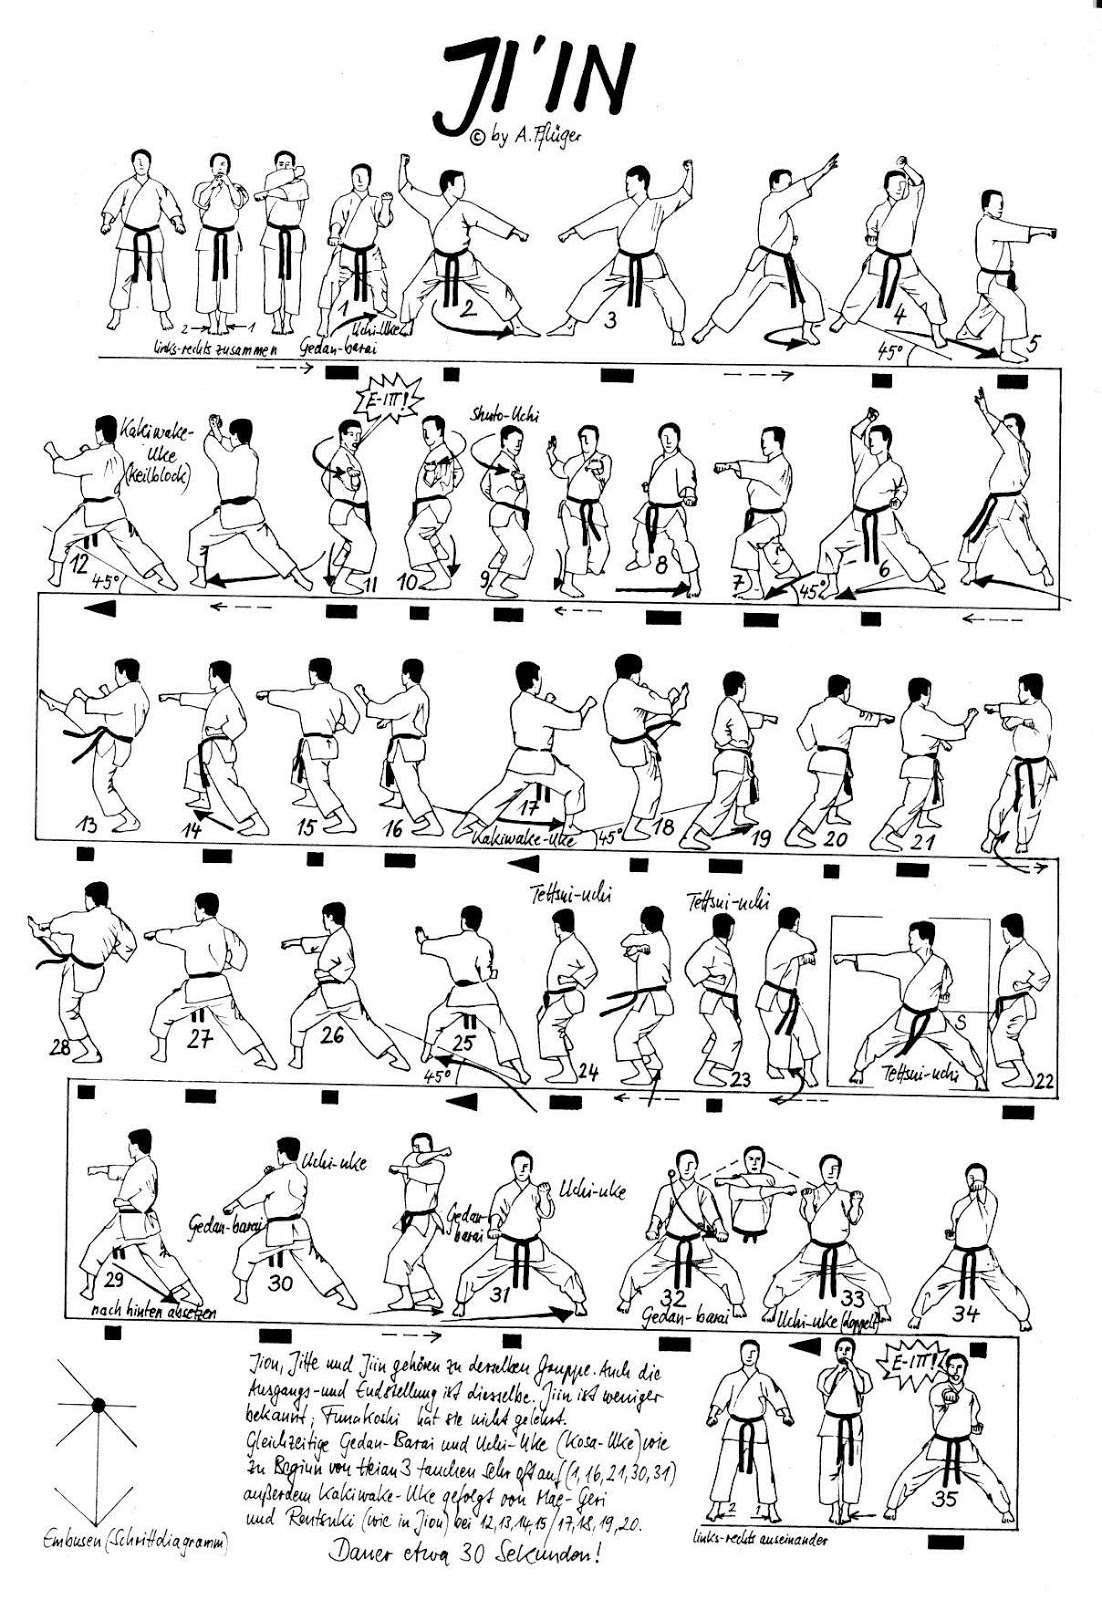 karate world: Kata Names and Movements with Pictures and Video